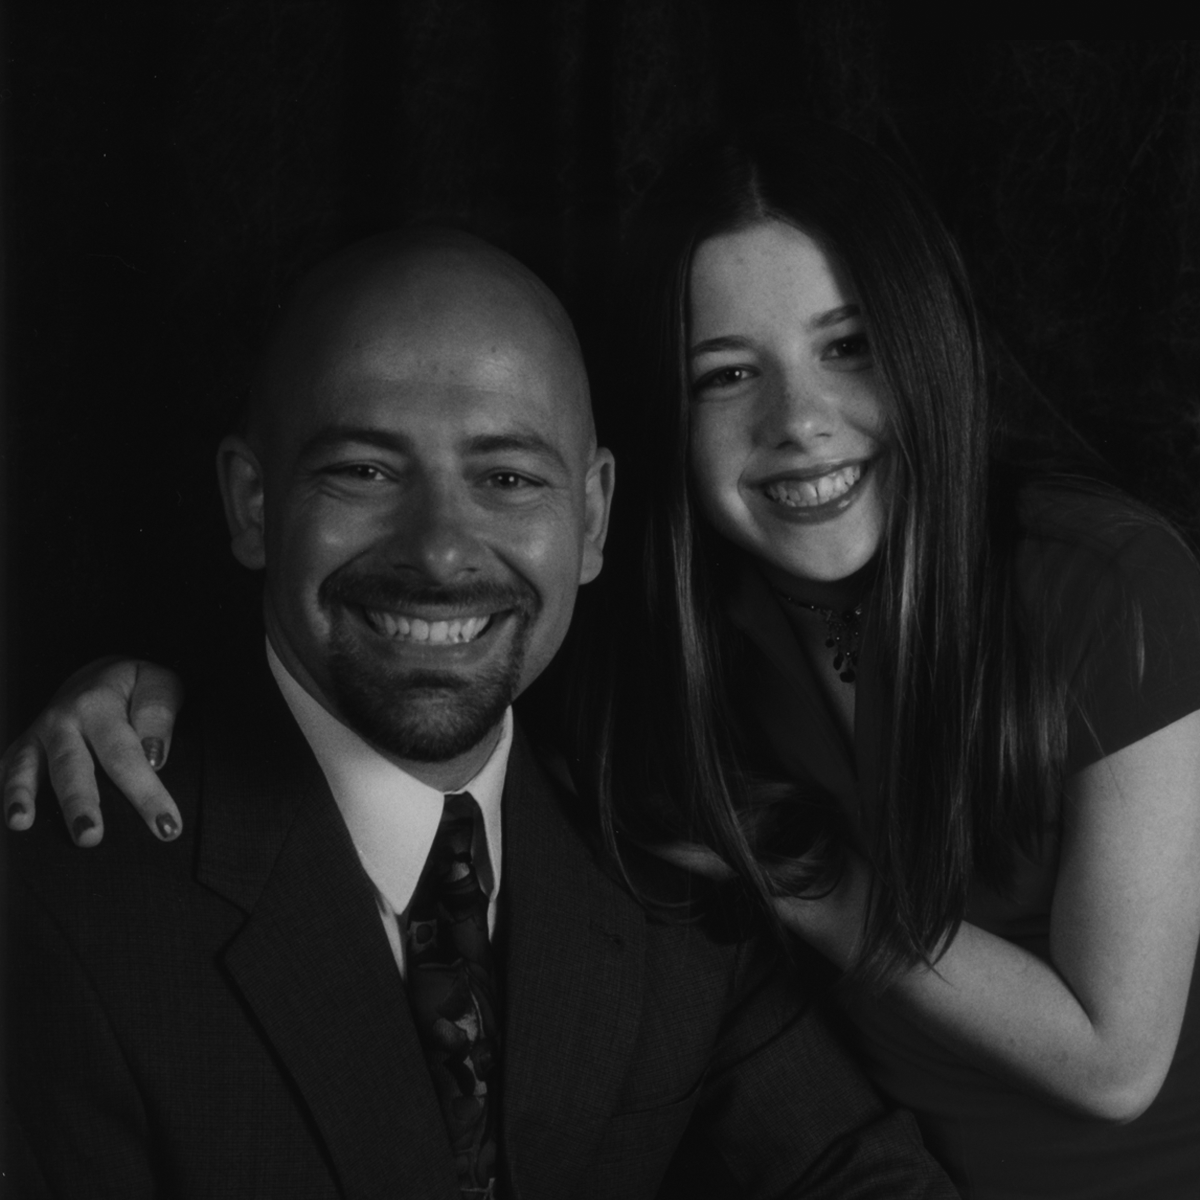 Photo of Drew Crecente, judge for the 2014 Life.Love. Game Design Challenge presented by Jennifer Ann's Group. He is shown here with his daughter Jennifer Ann Crecente.